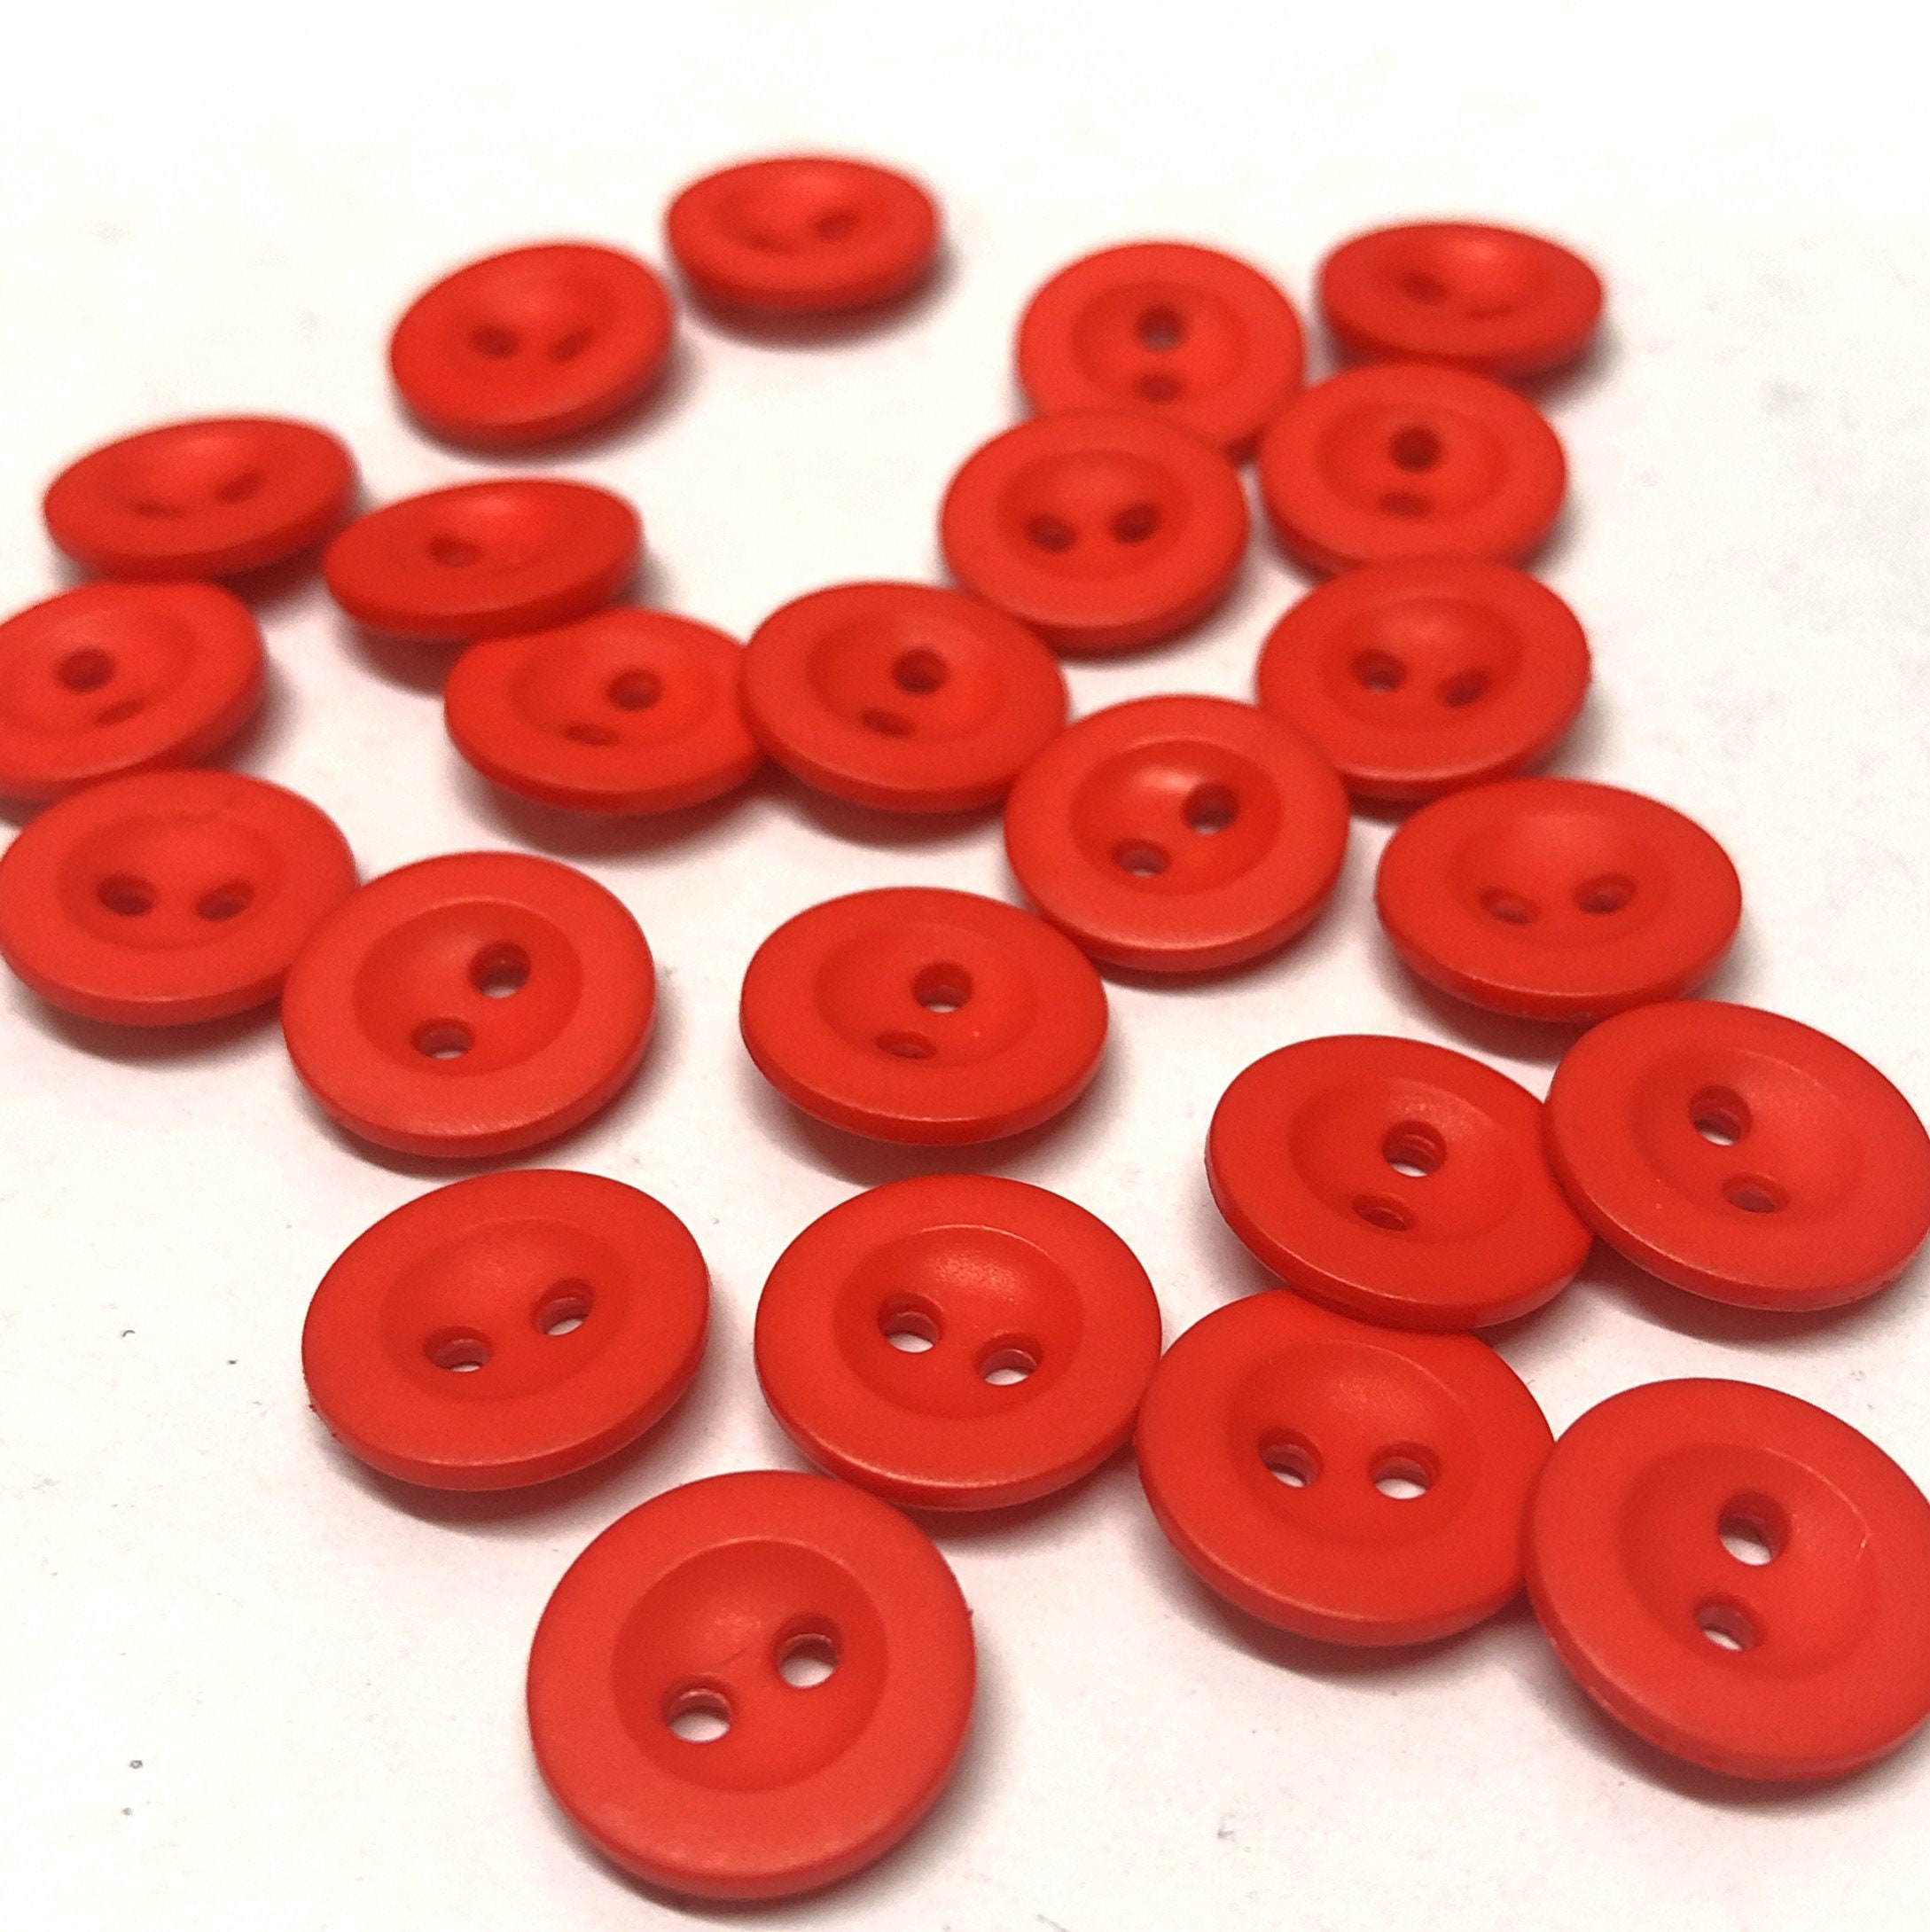 10, 25mm Light Wood Buttons With Handmade With Love Wording